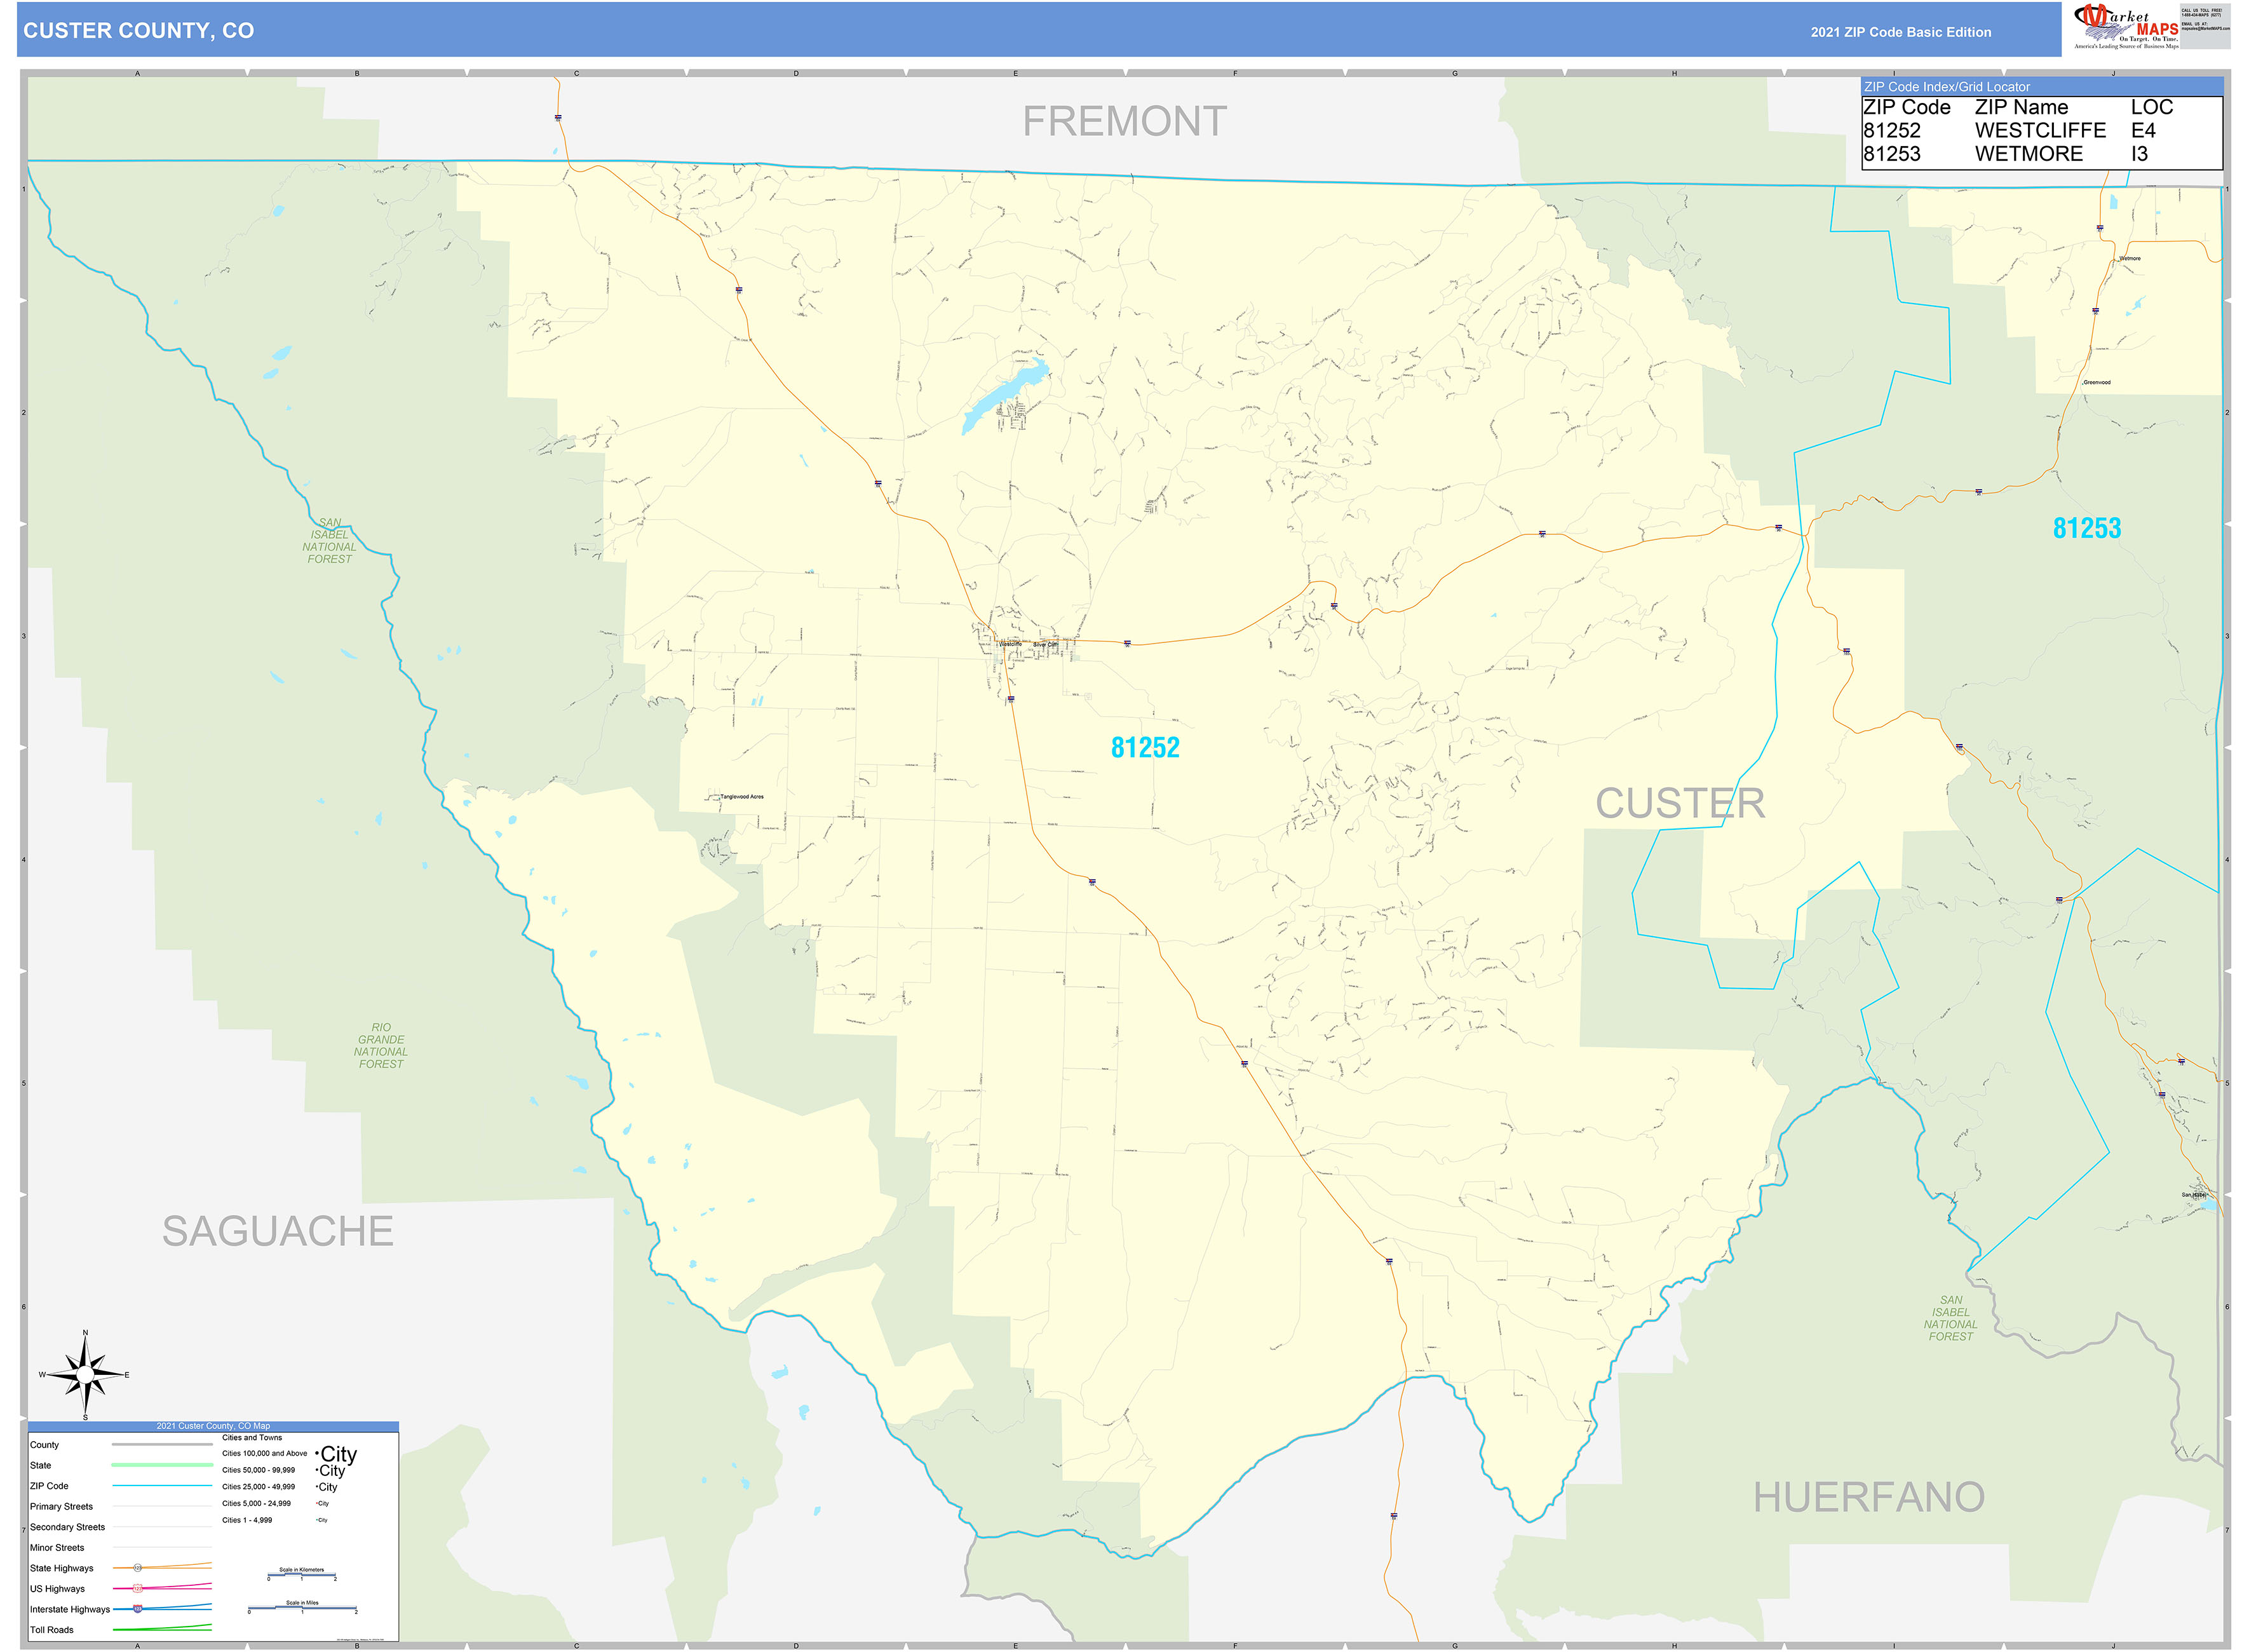 Custer County, CO Zip Code Wall Map Basic Style by MarketMAPS